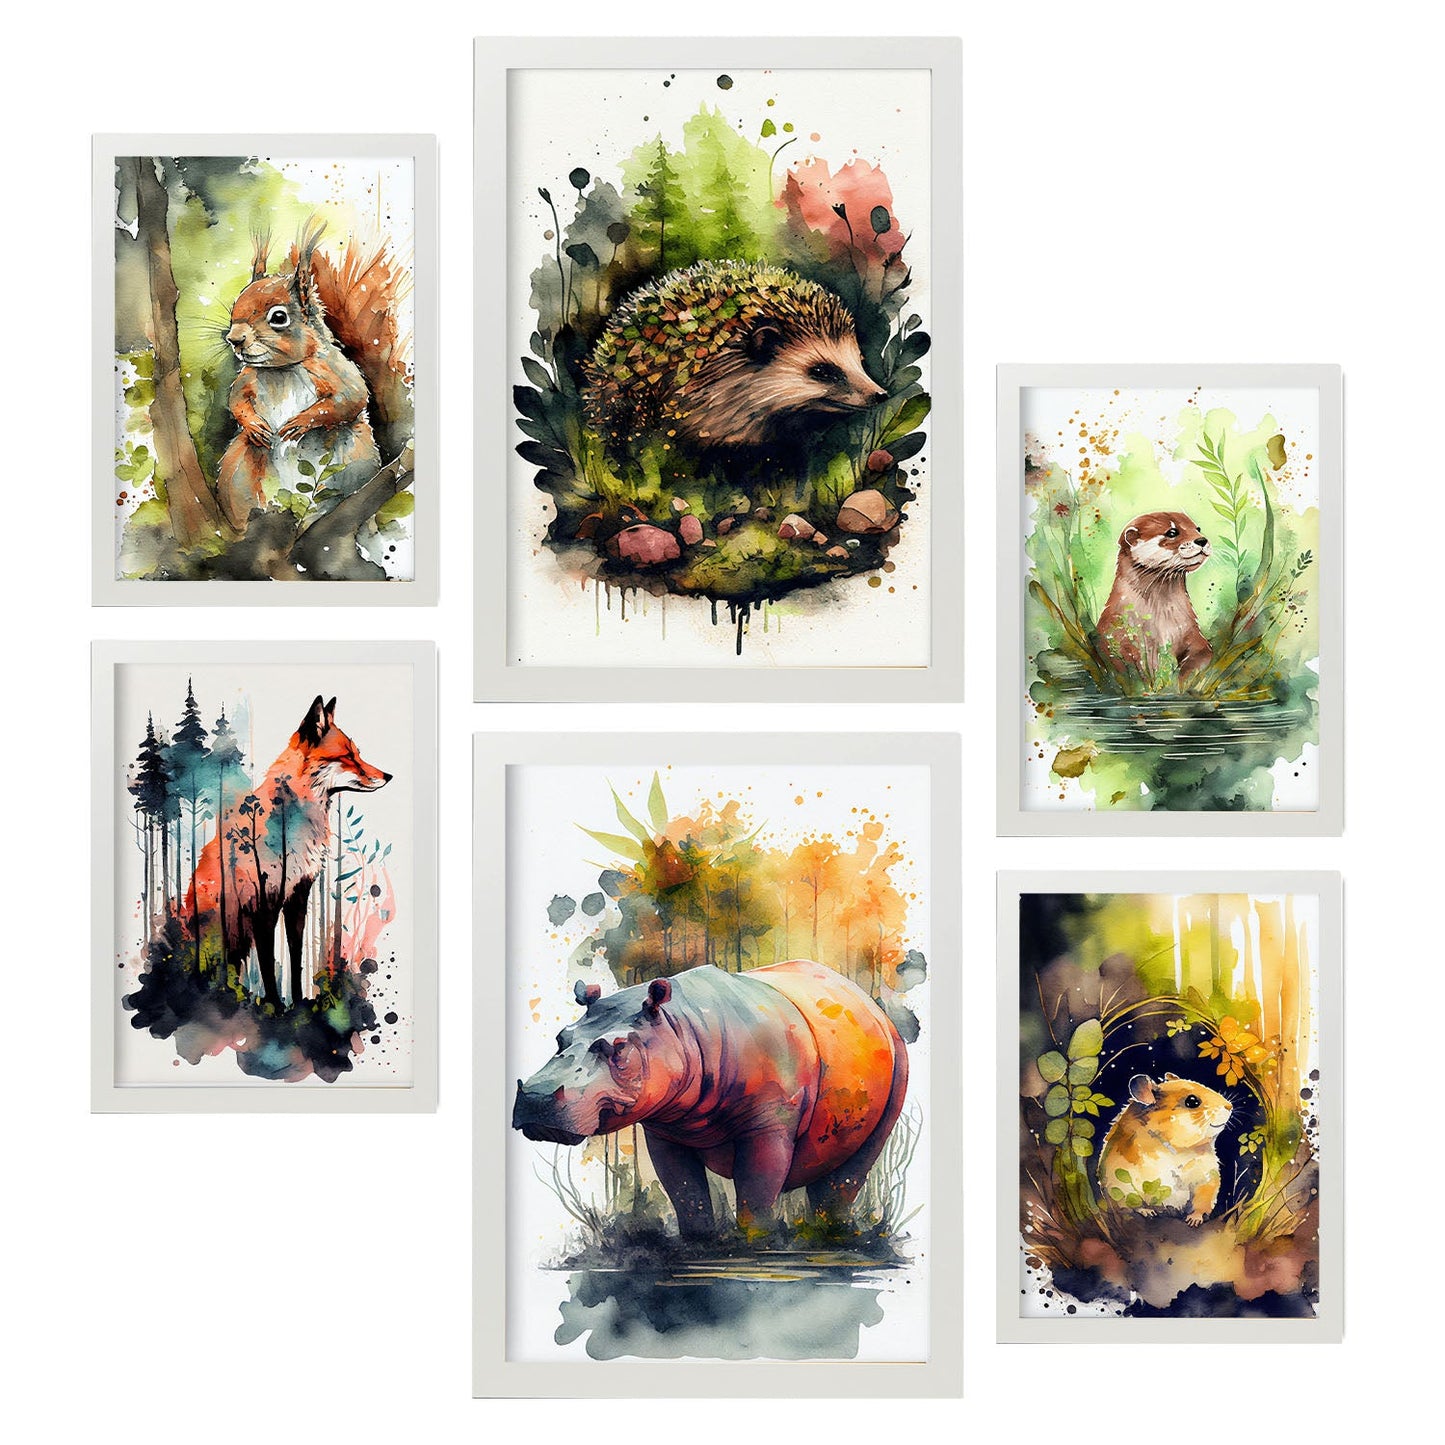 Nacnic Watercolor Animal Set_9. Aesthetic Wall Art Prints for Bedroom or Living Room Design.